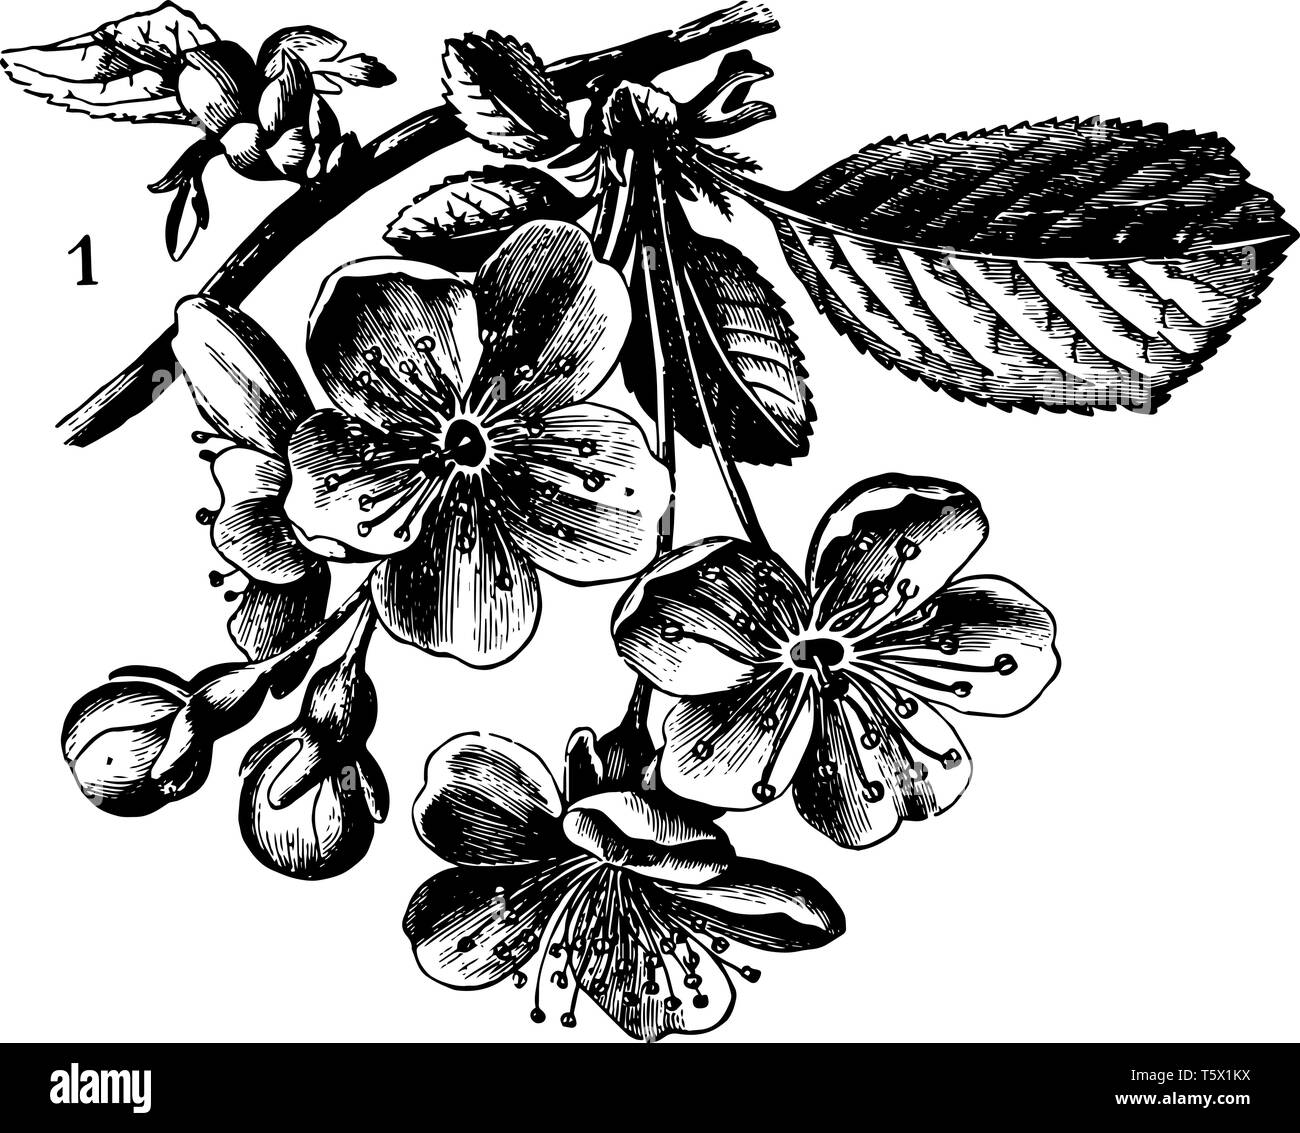 Flowers is long slightly curved line for the stalk it is easier by using basic shapes and work to shade in the petal vintage line drawing or engraving Stock Vector